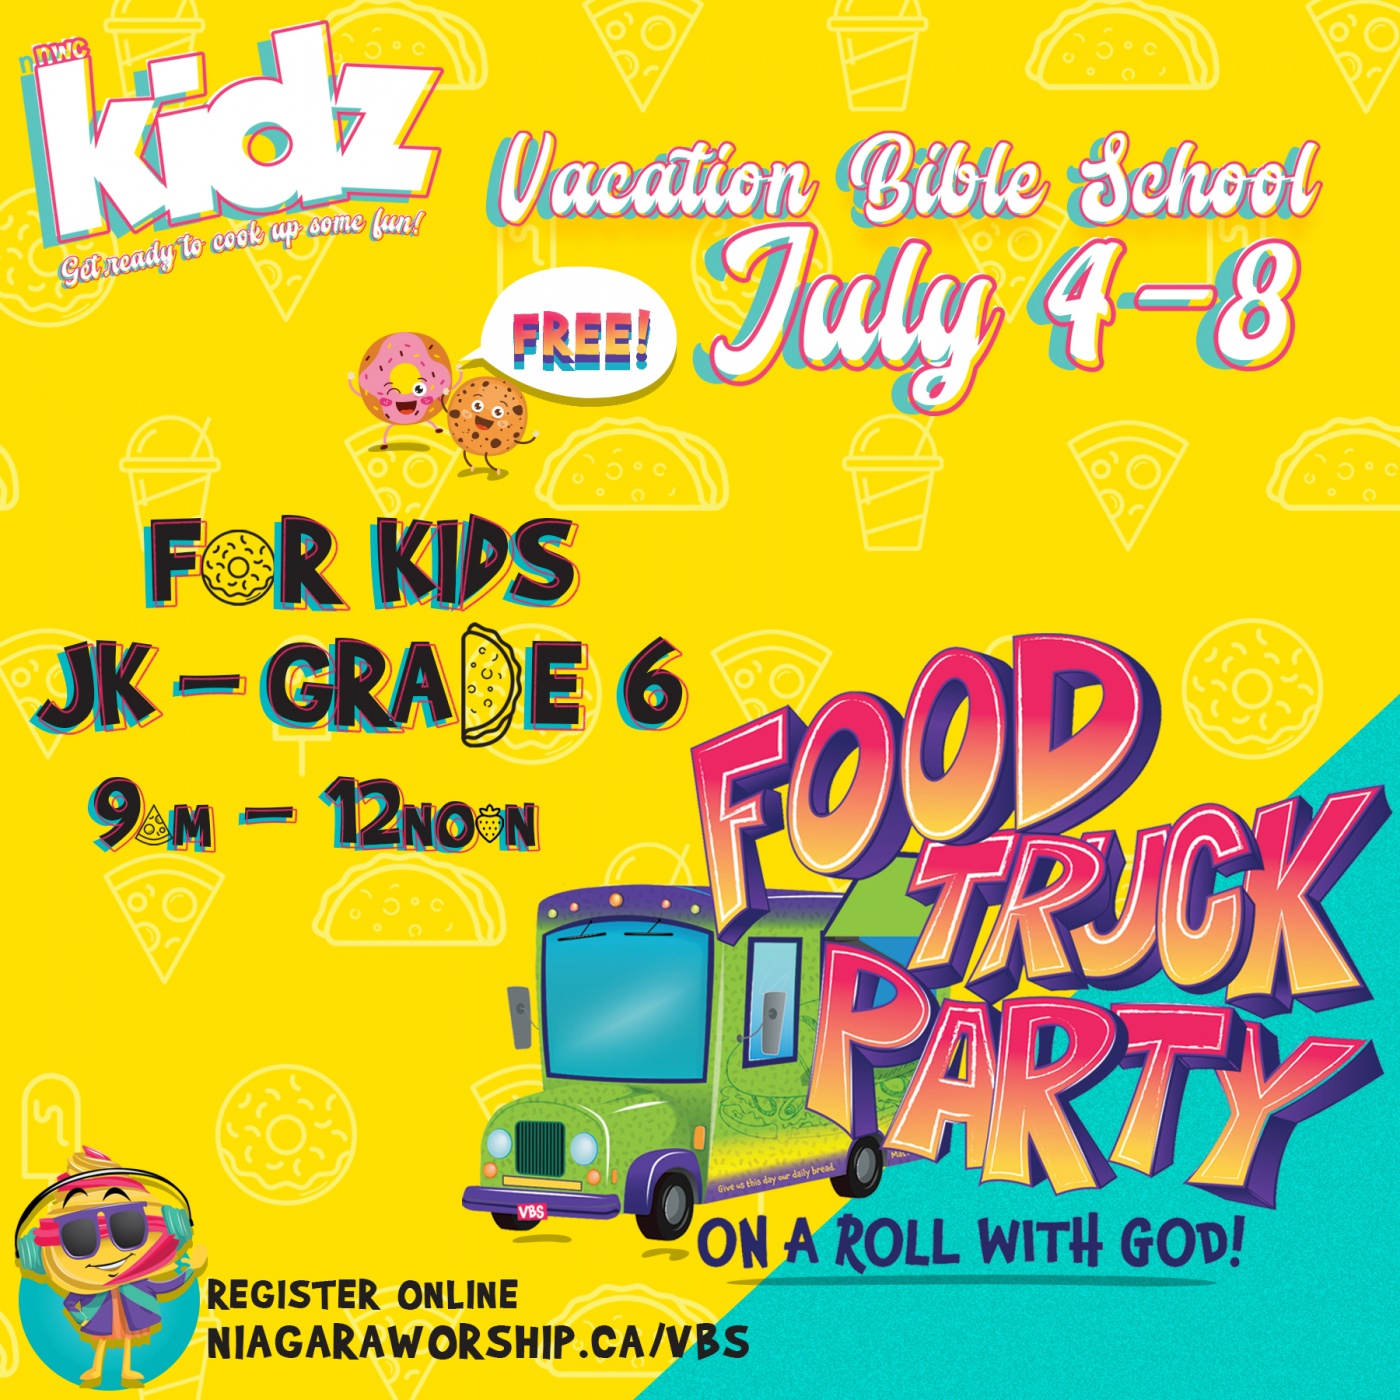 VACATION BIBLE SCHOOL - food truck party!